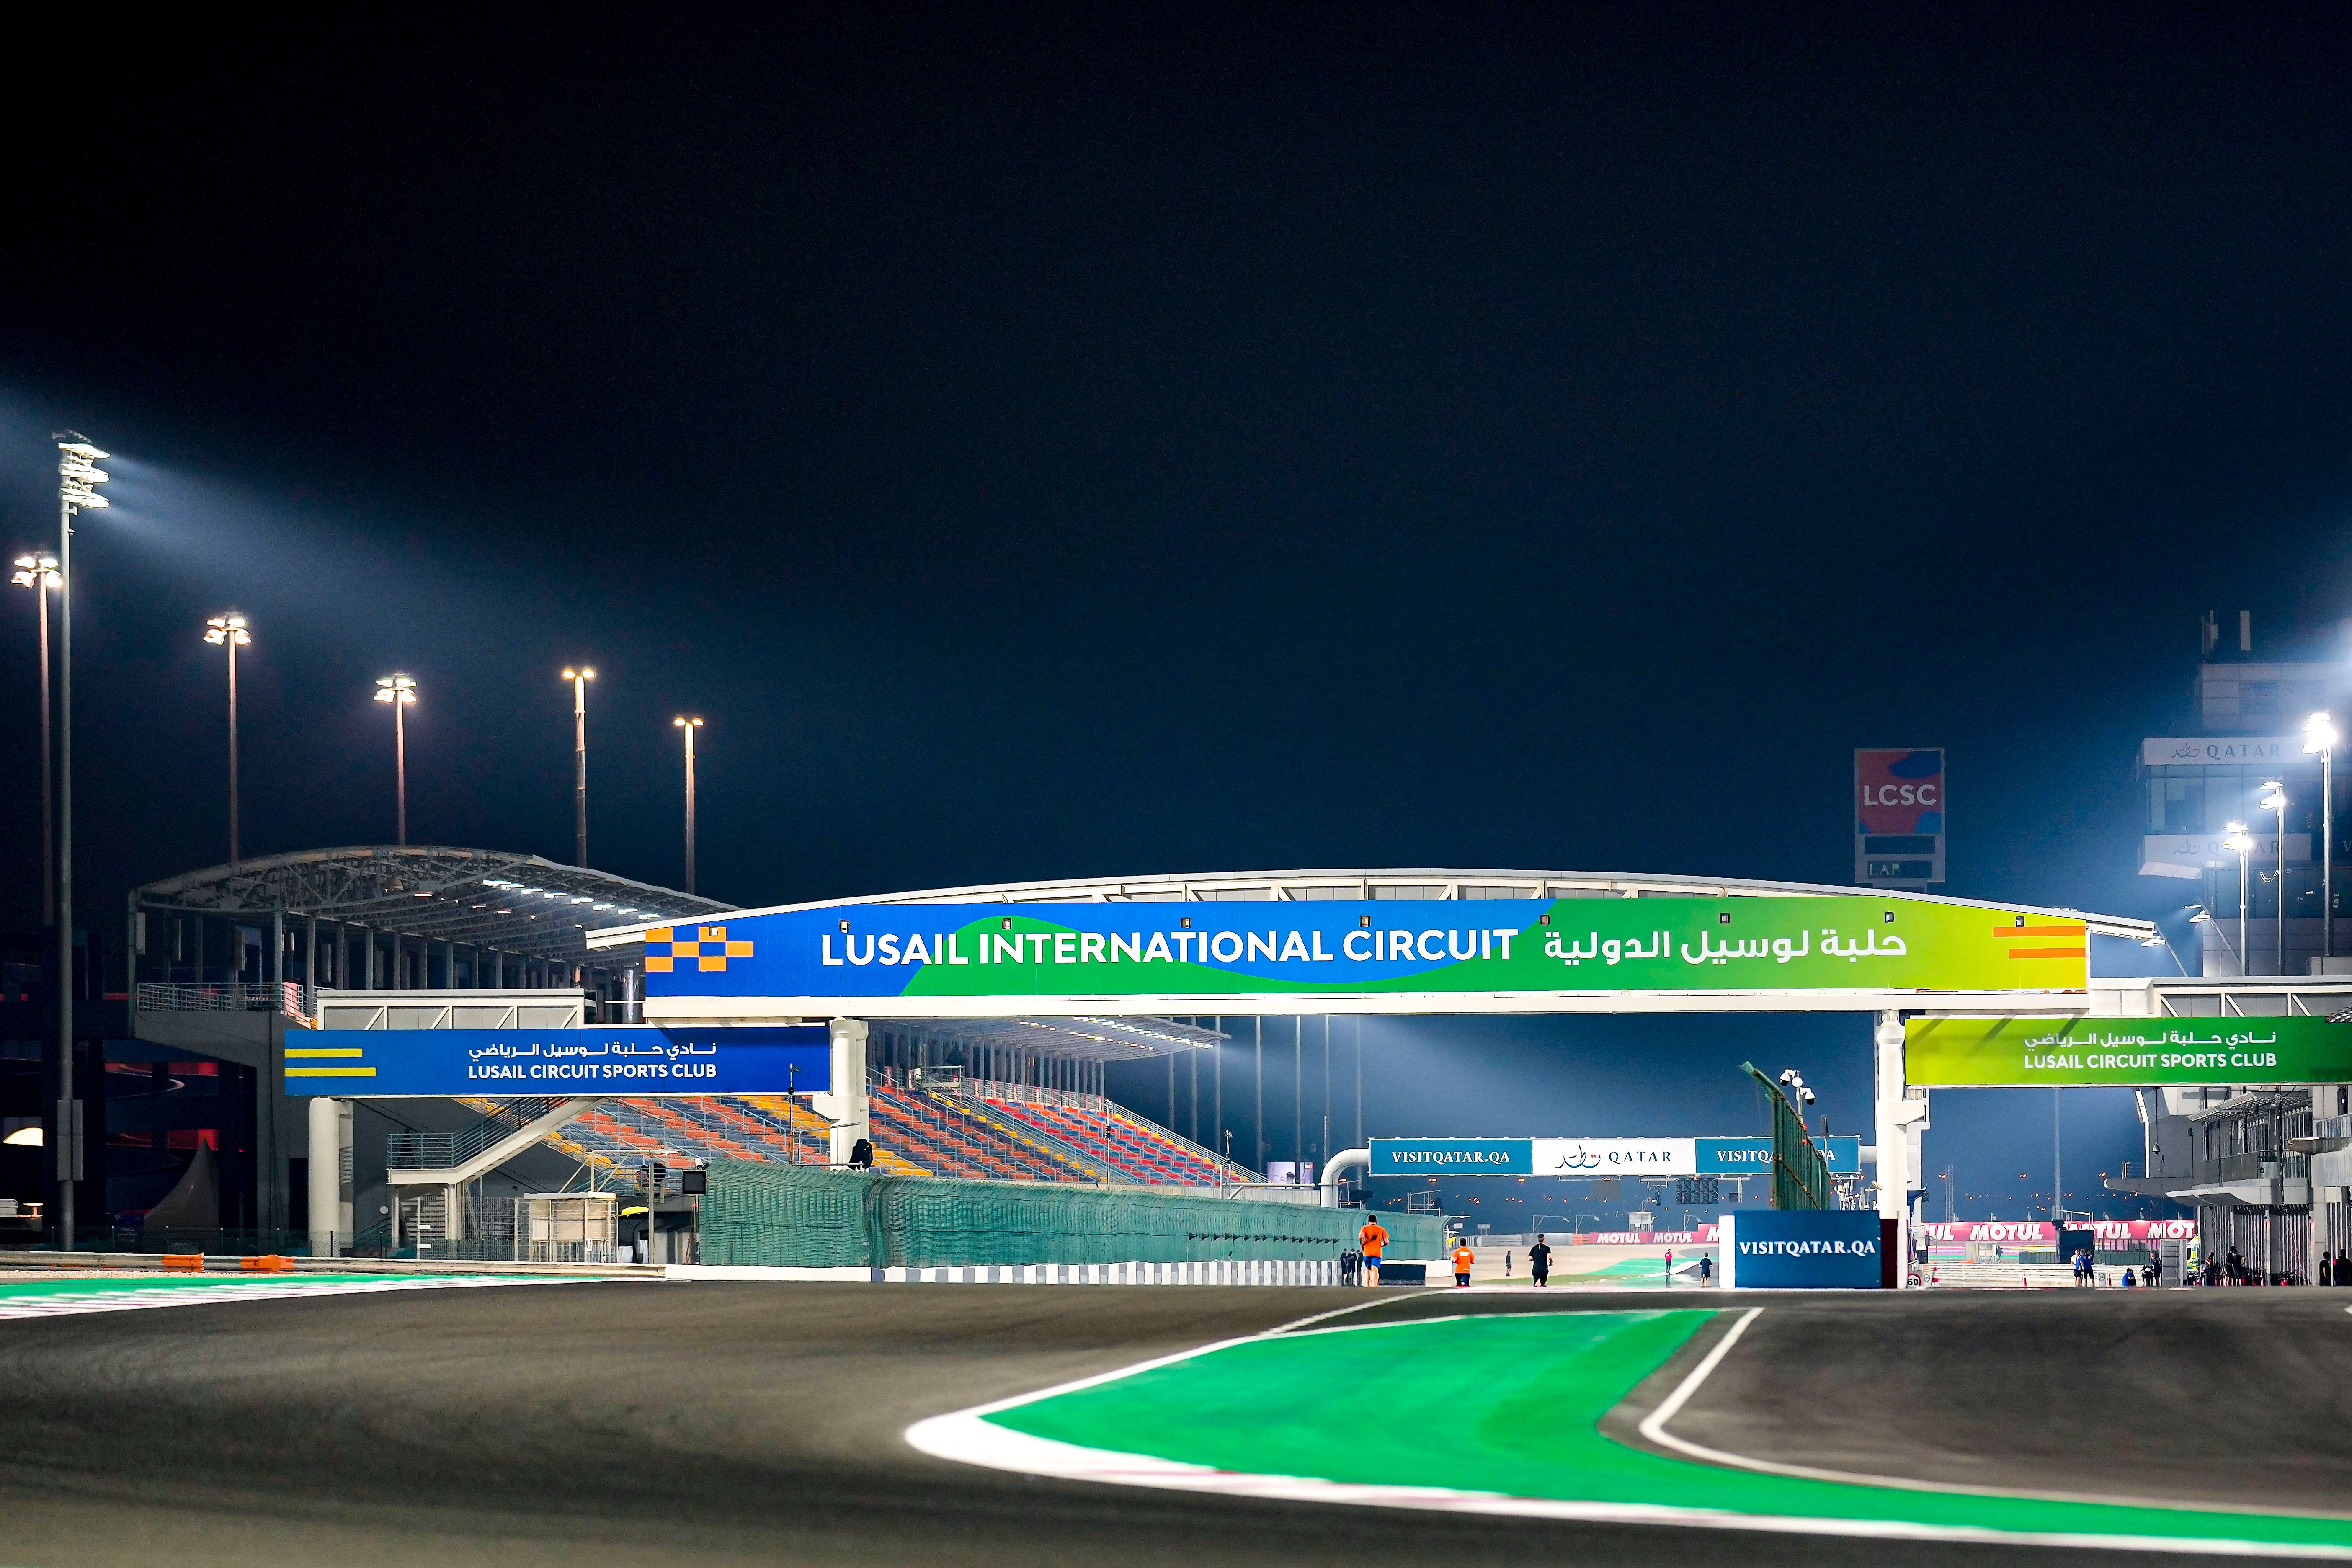 Fitness and Driving Events Make a Return to LCSC during the Holy Month of Ramadan, with New Karting Track and karts Added to Complement the Festivities